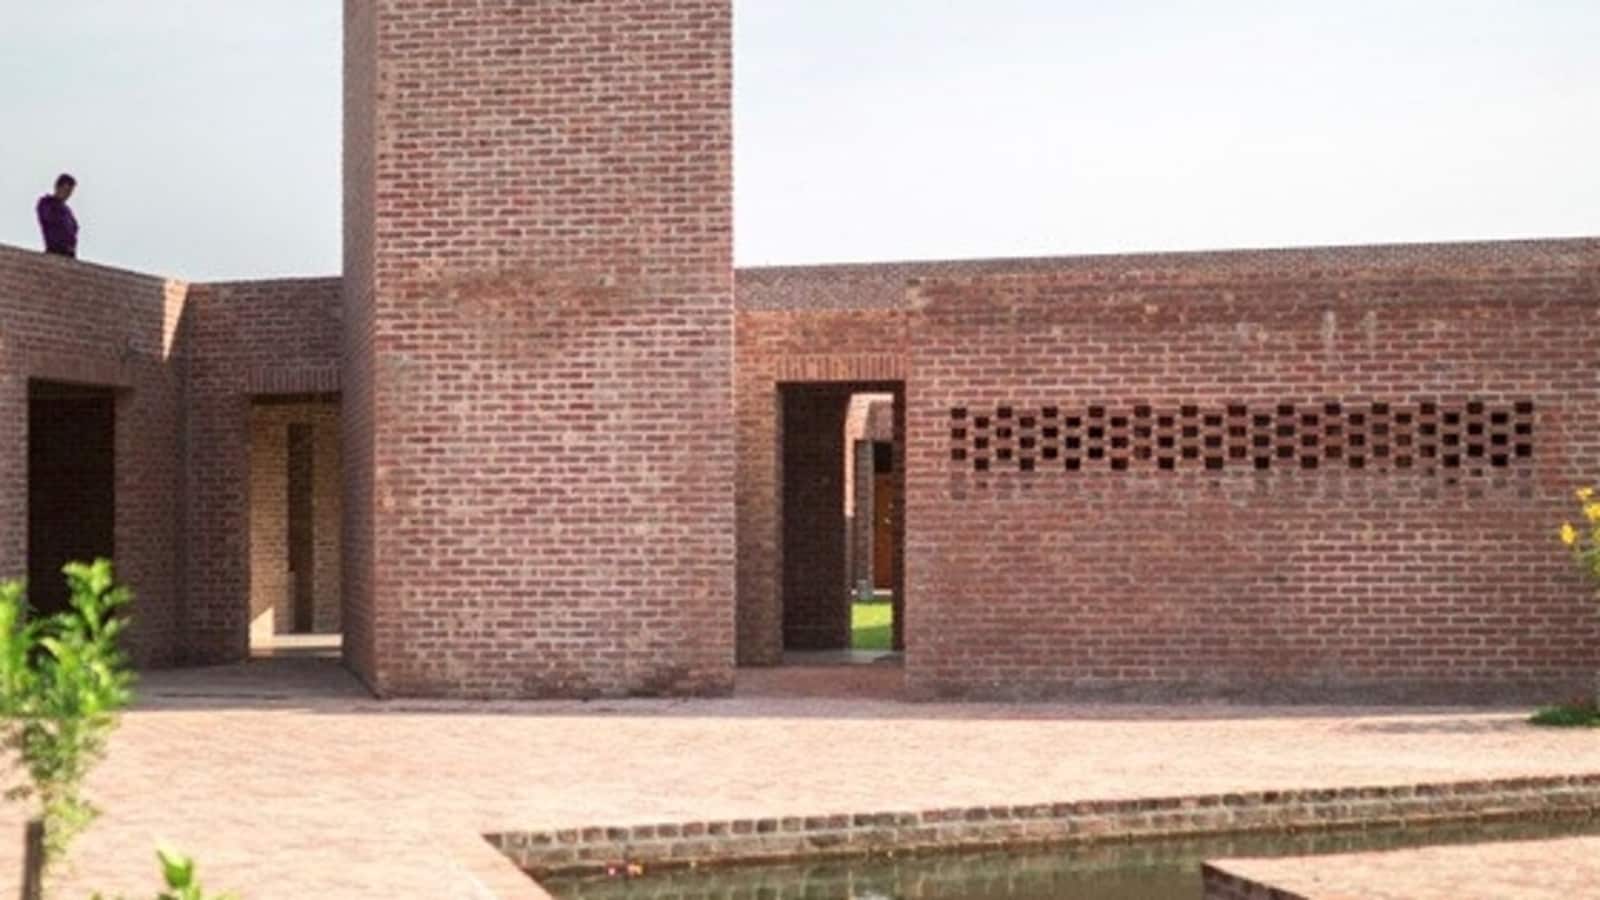 The World's Best Building Is A Rural Hospital In Bangladesh.